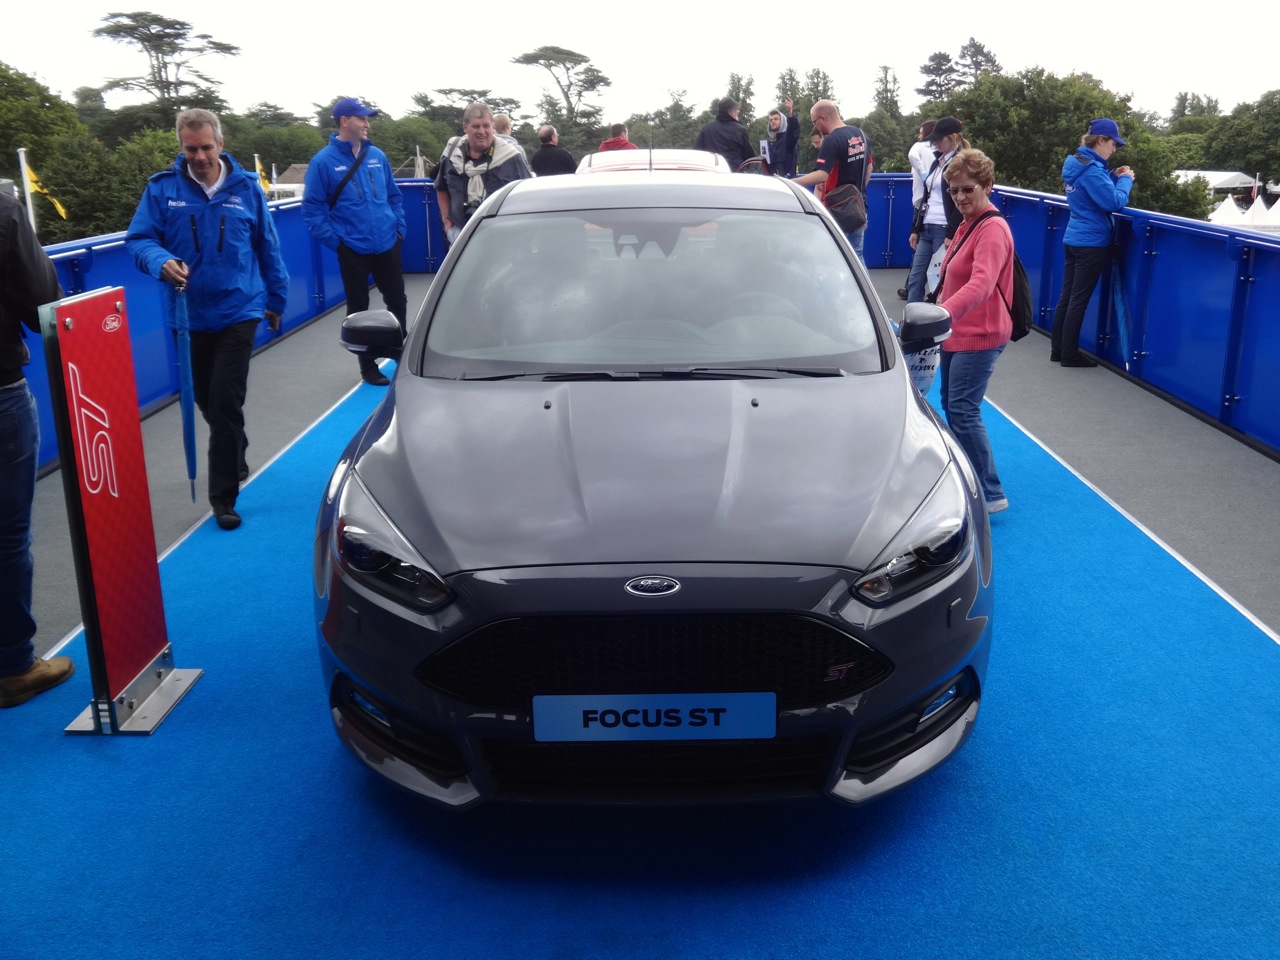 Ford Focus ST - Goodwood 2014